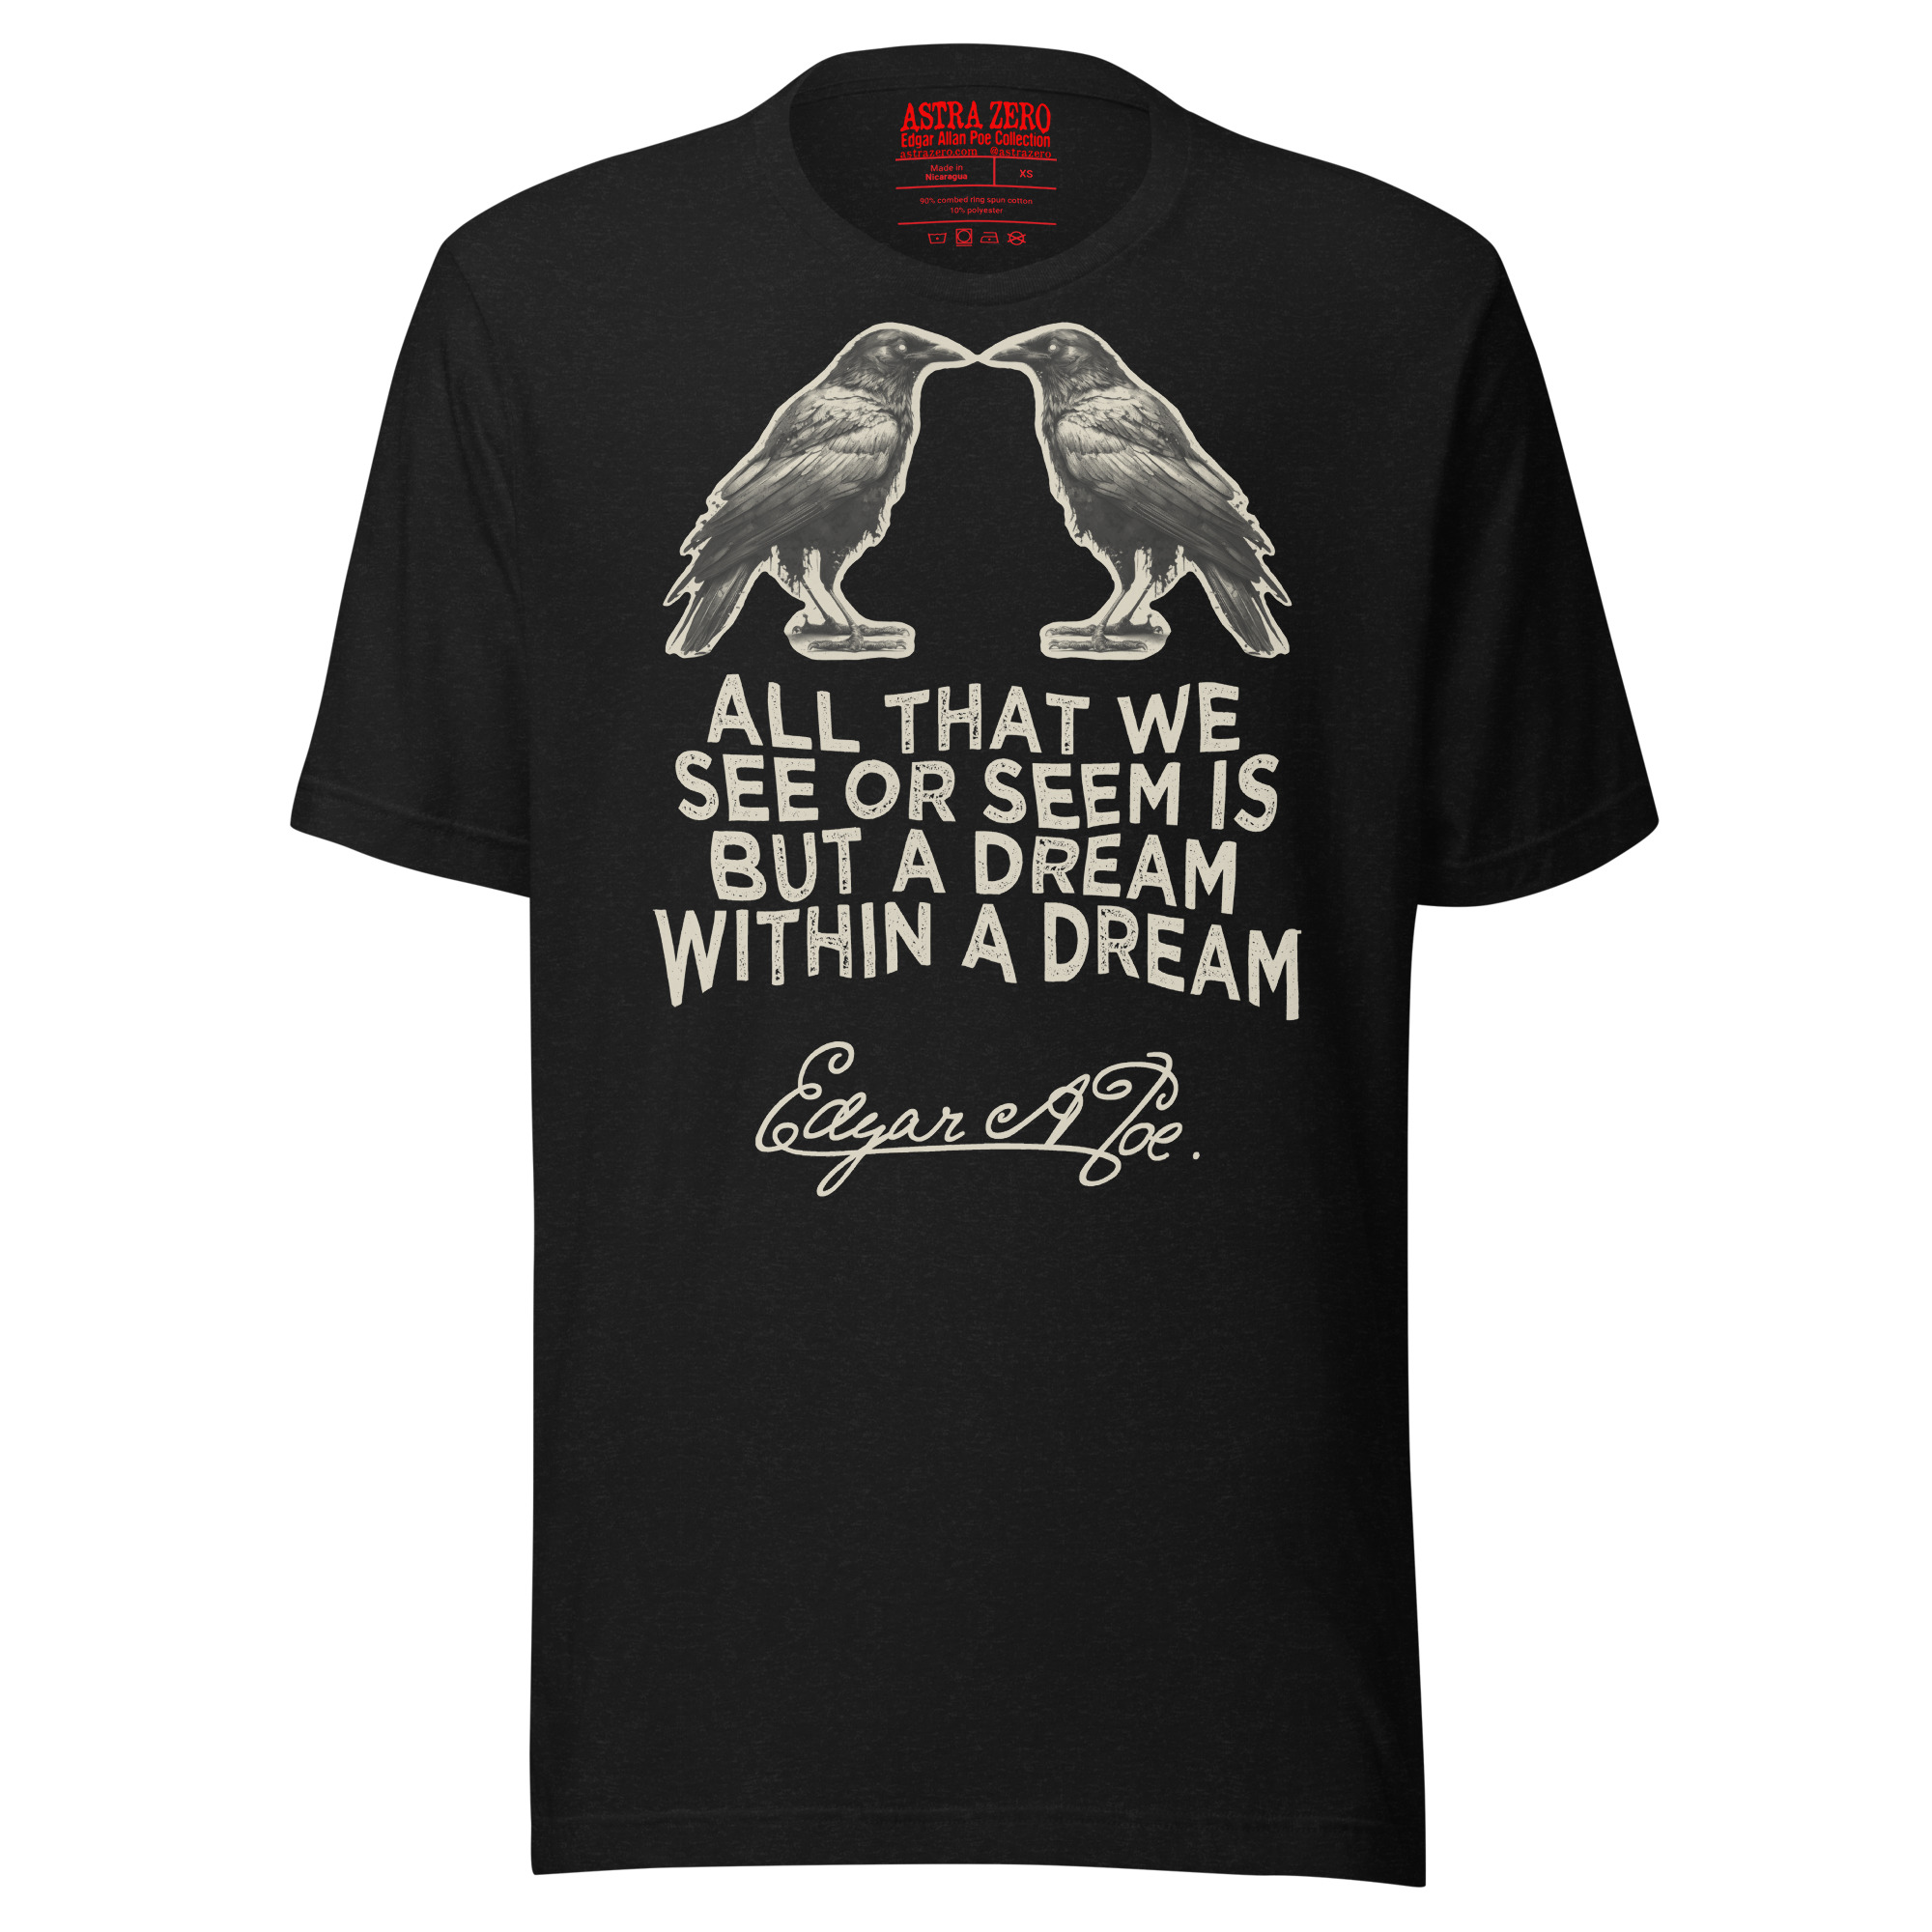 Featured image for “All that we see, E.A.Poe - Unisex t-shirt”